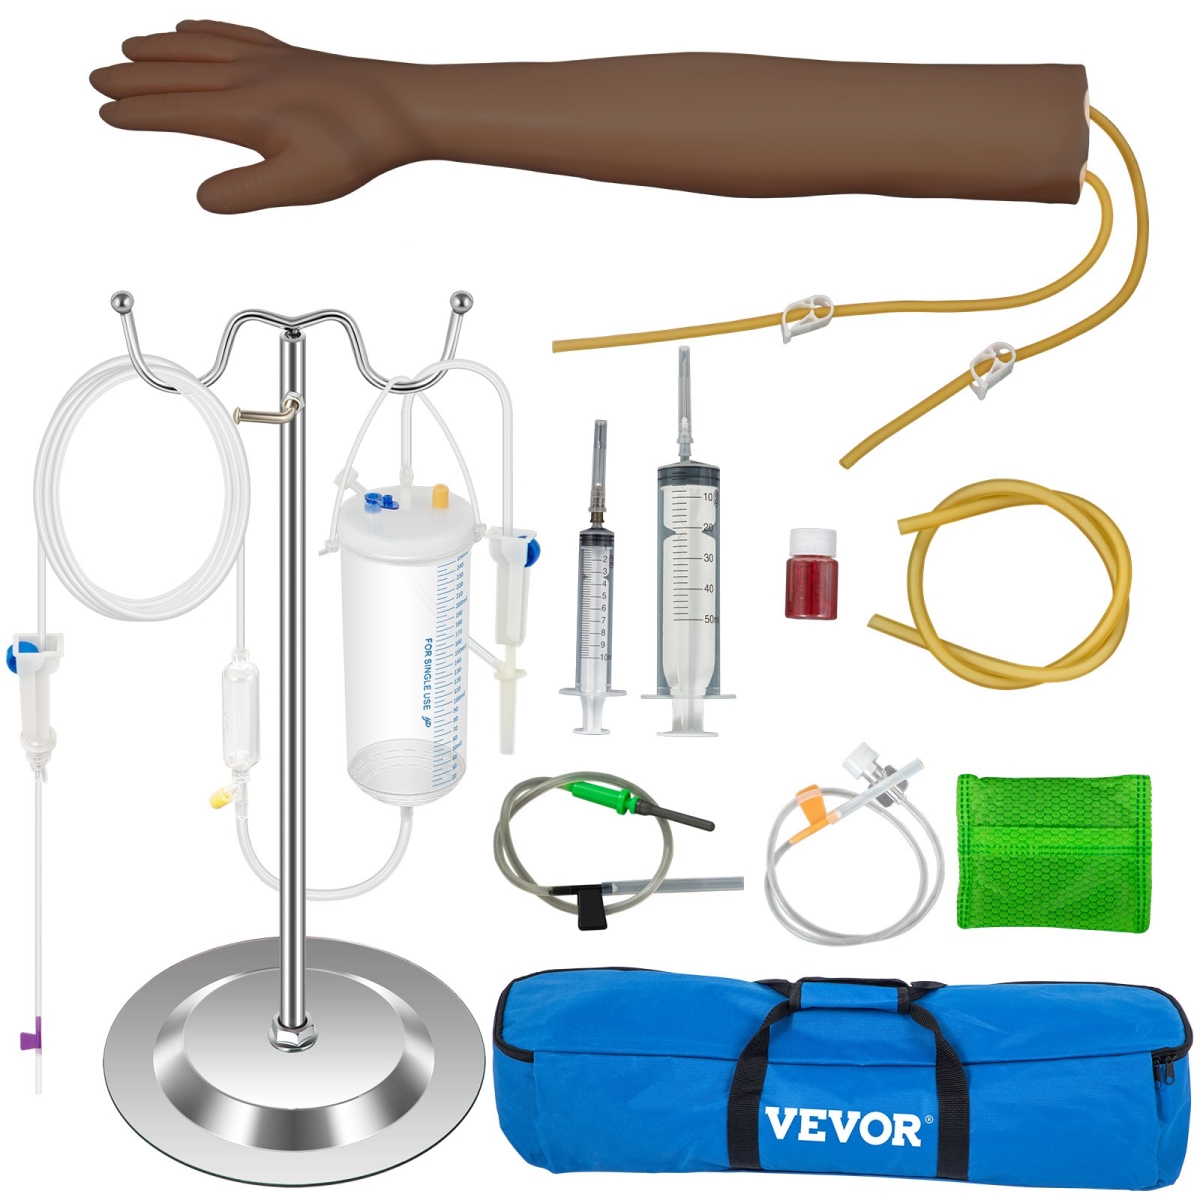 Picture of Vevor JXMXJMCCLXBZS0001V0 Dark Skin IV Practice Kit Venipuncture Learning Phlebotomy Practice Arm Kit with Infusion Stand for Nurse&#44; Medical Students